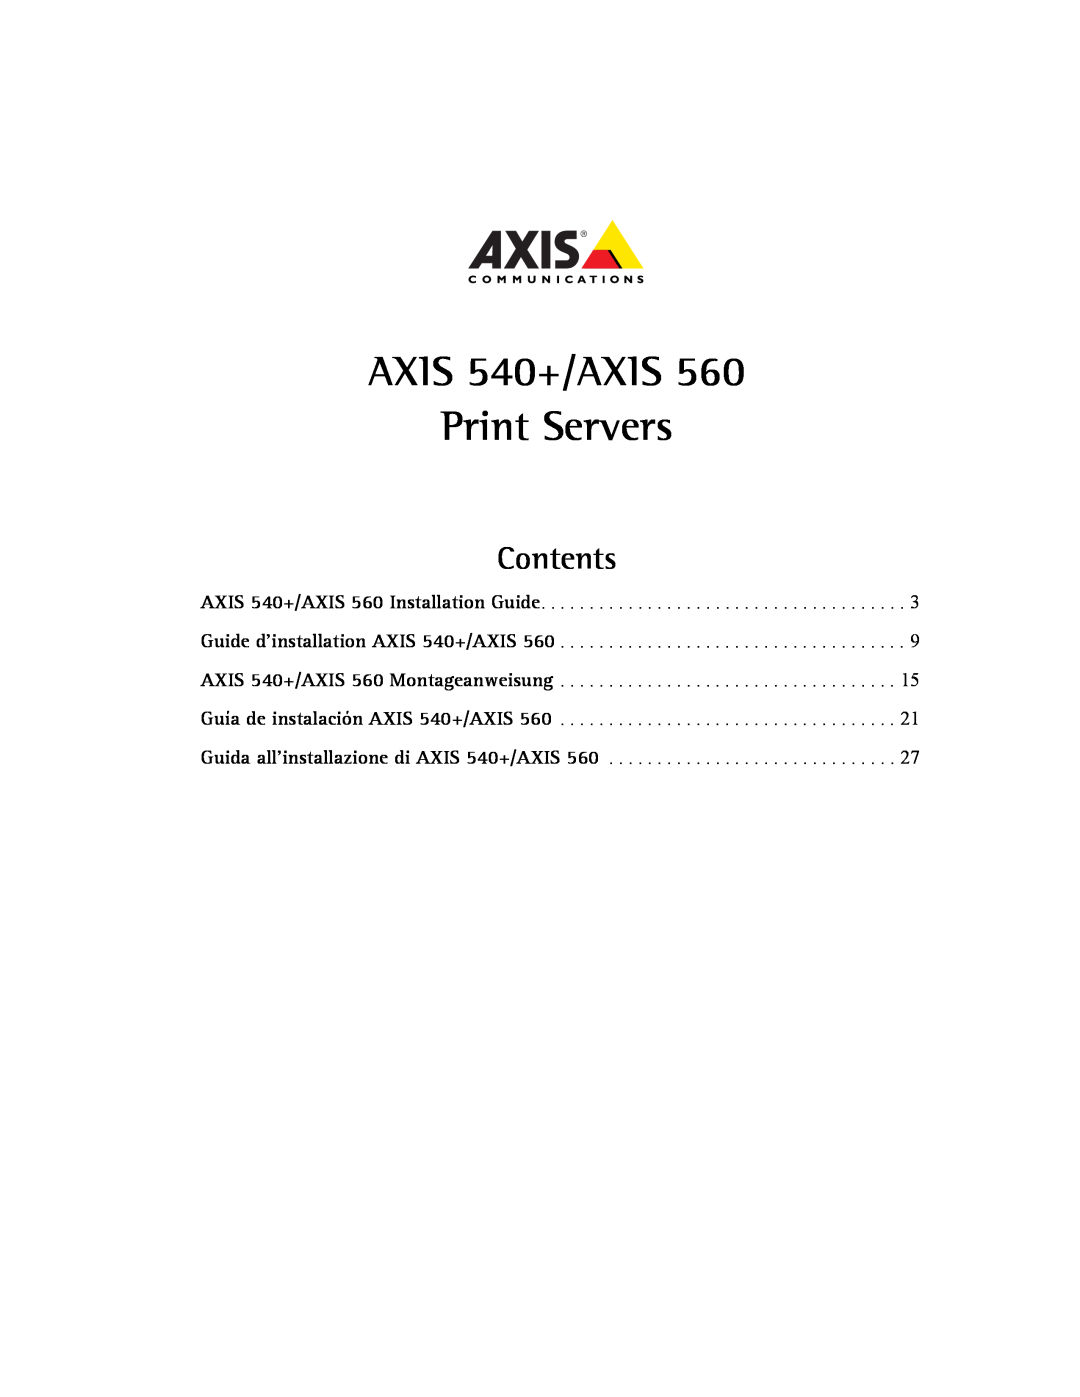 Axis Communications 560 manual AXIS 540+/AXIS Print Servers, Contents 